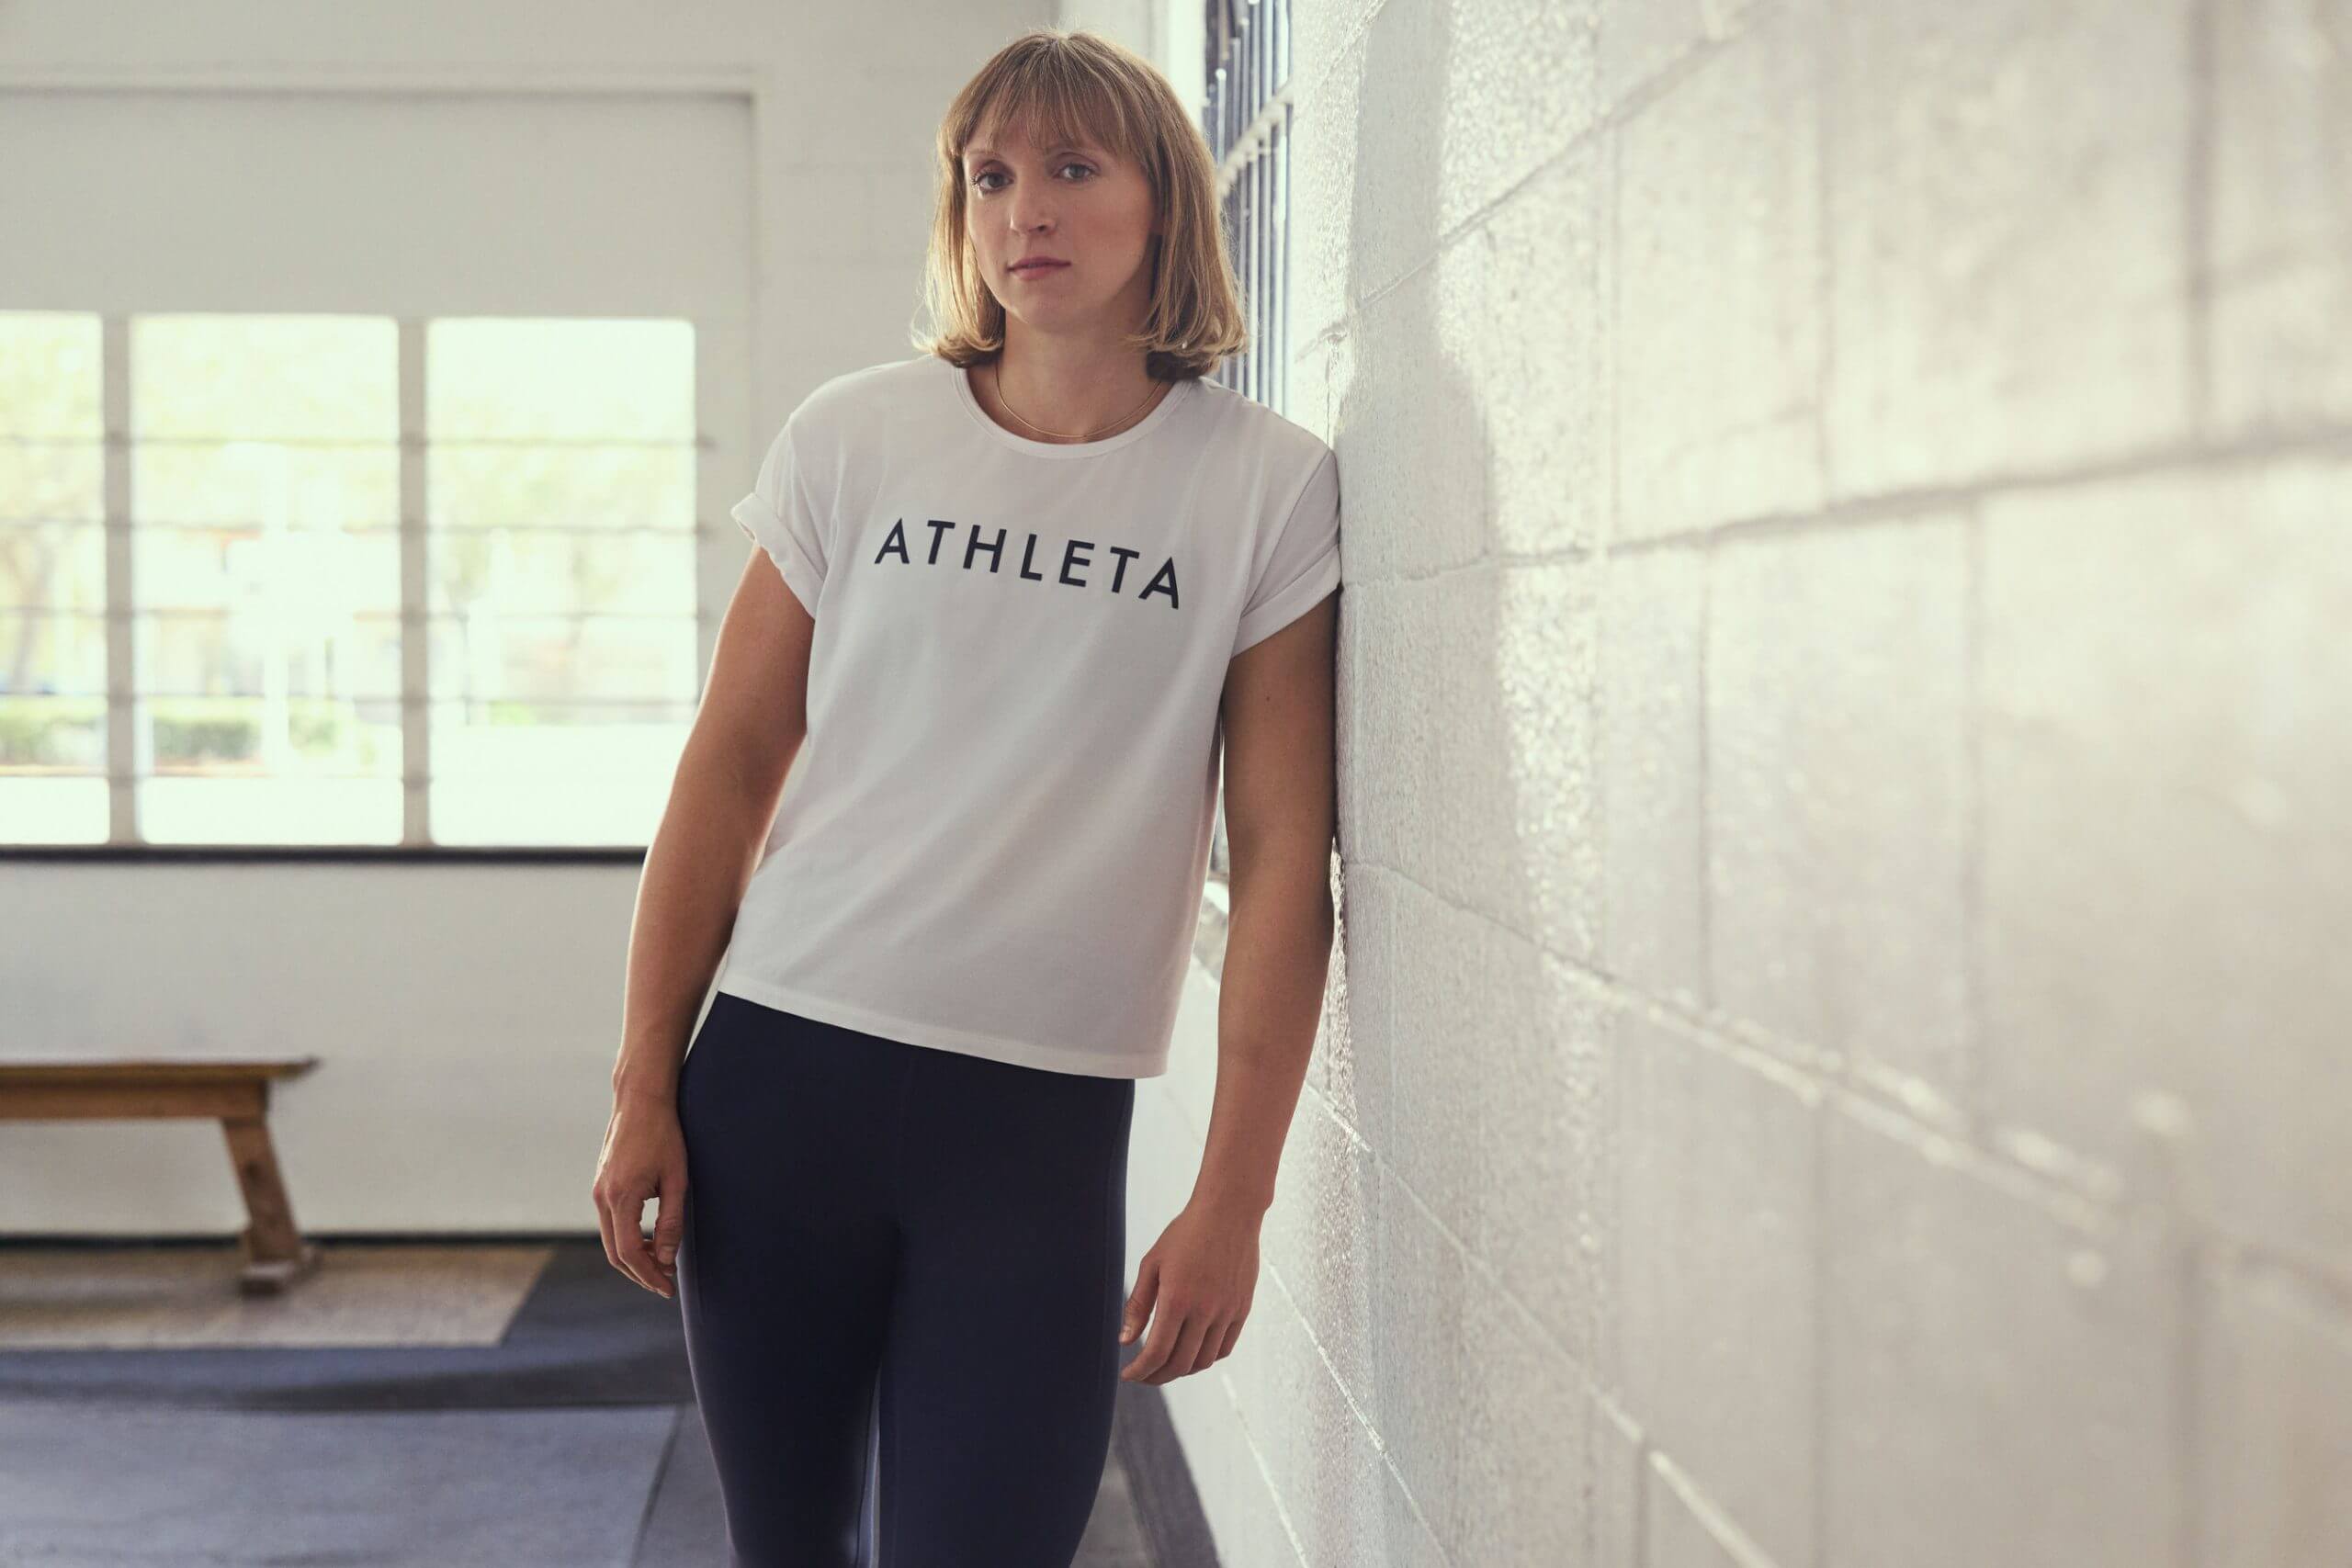 Katie Ledecky Signs Five-Year Partnership with Athleta